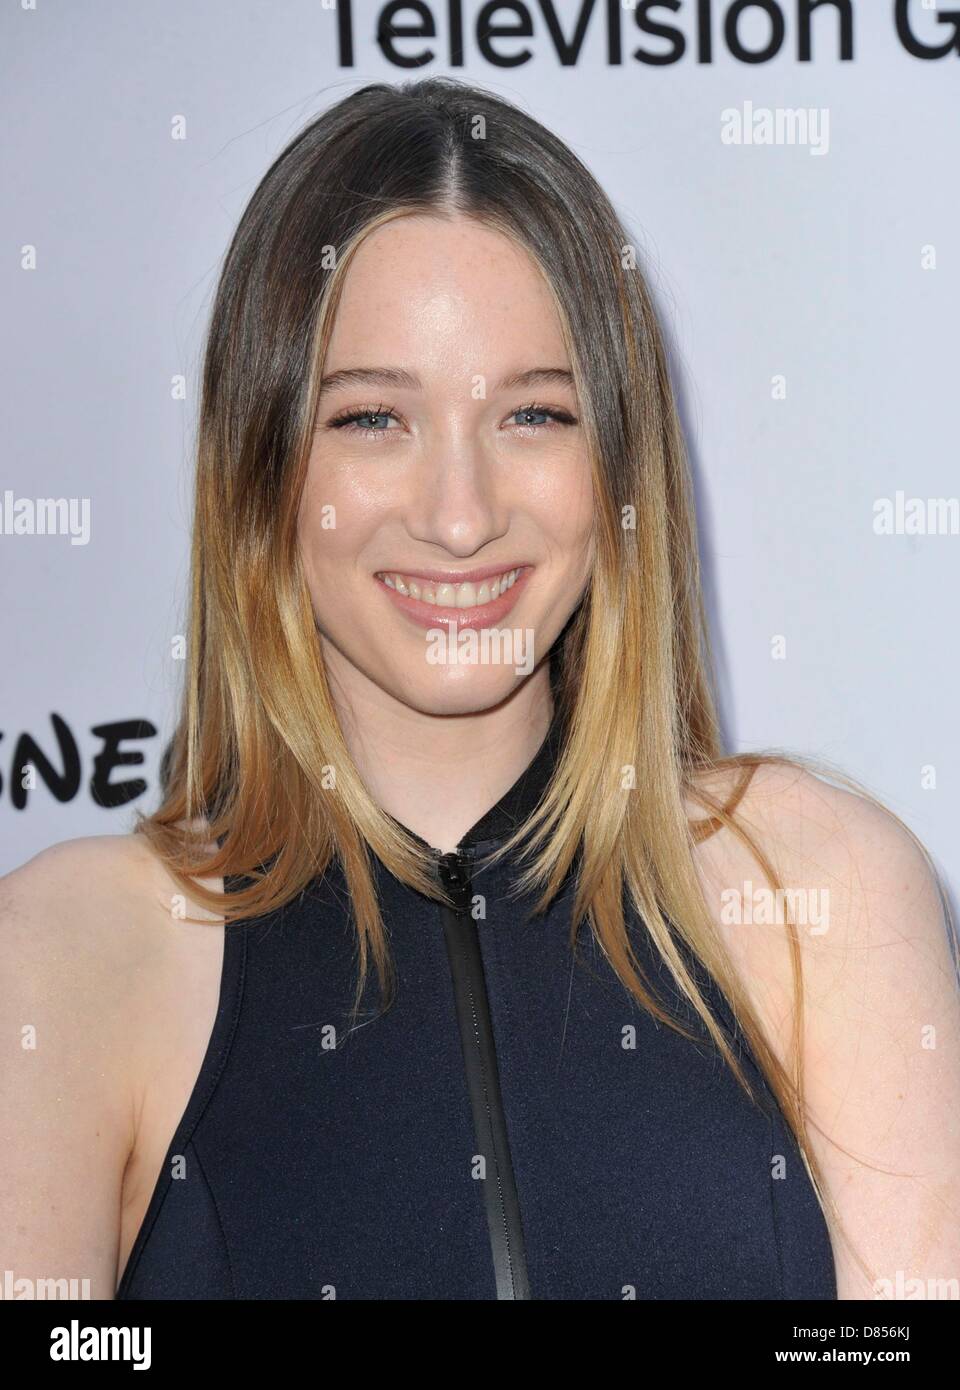 Los Angeles, California, USA. 19th May 2013. Sophie Lowe at arrivals for Disney Media Networks International Upfronts, The Walt Disney Studios Lot, Los Angeles, CA May 19, 2013. Photo By: Dee Cercone/Everett Collection/Alamy Live News Stock Photo